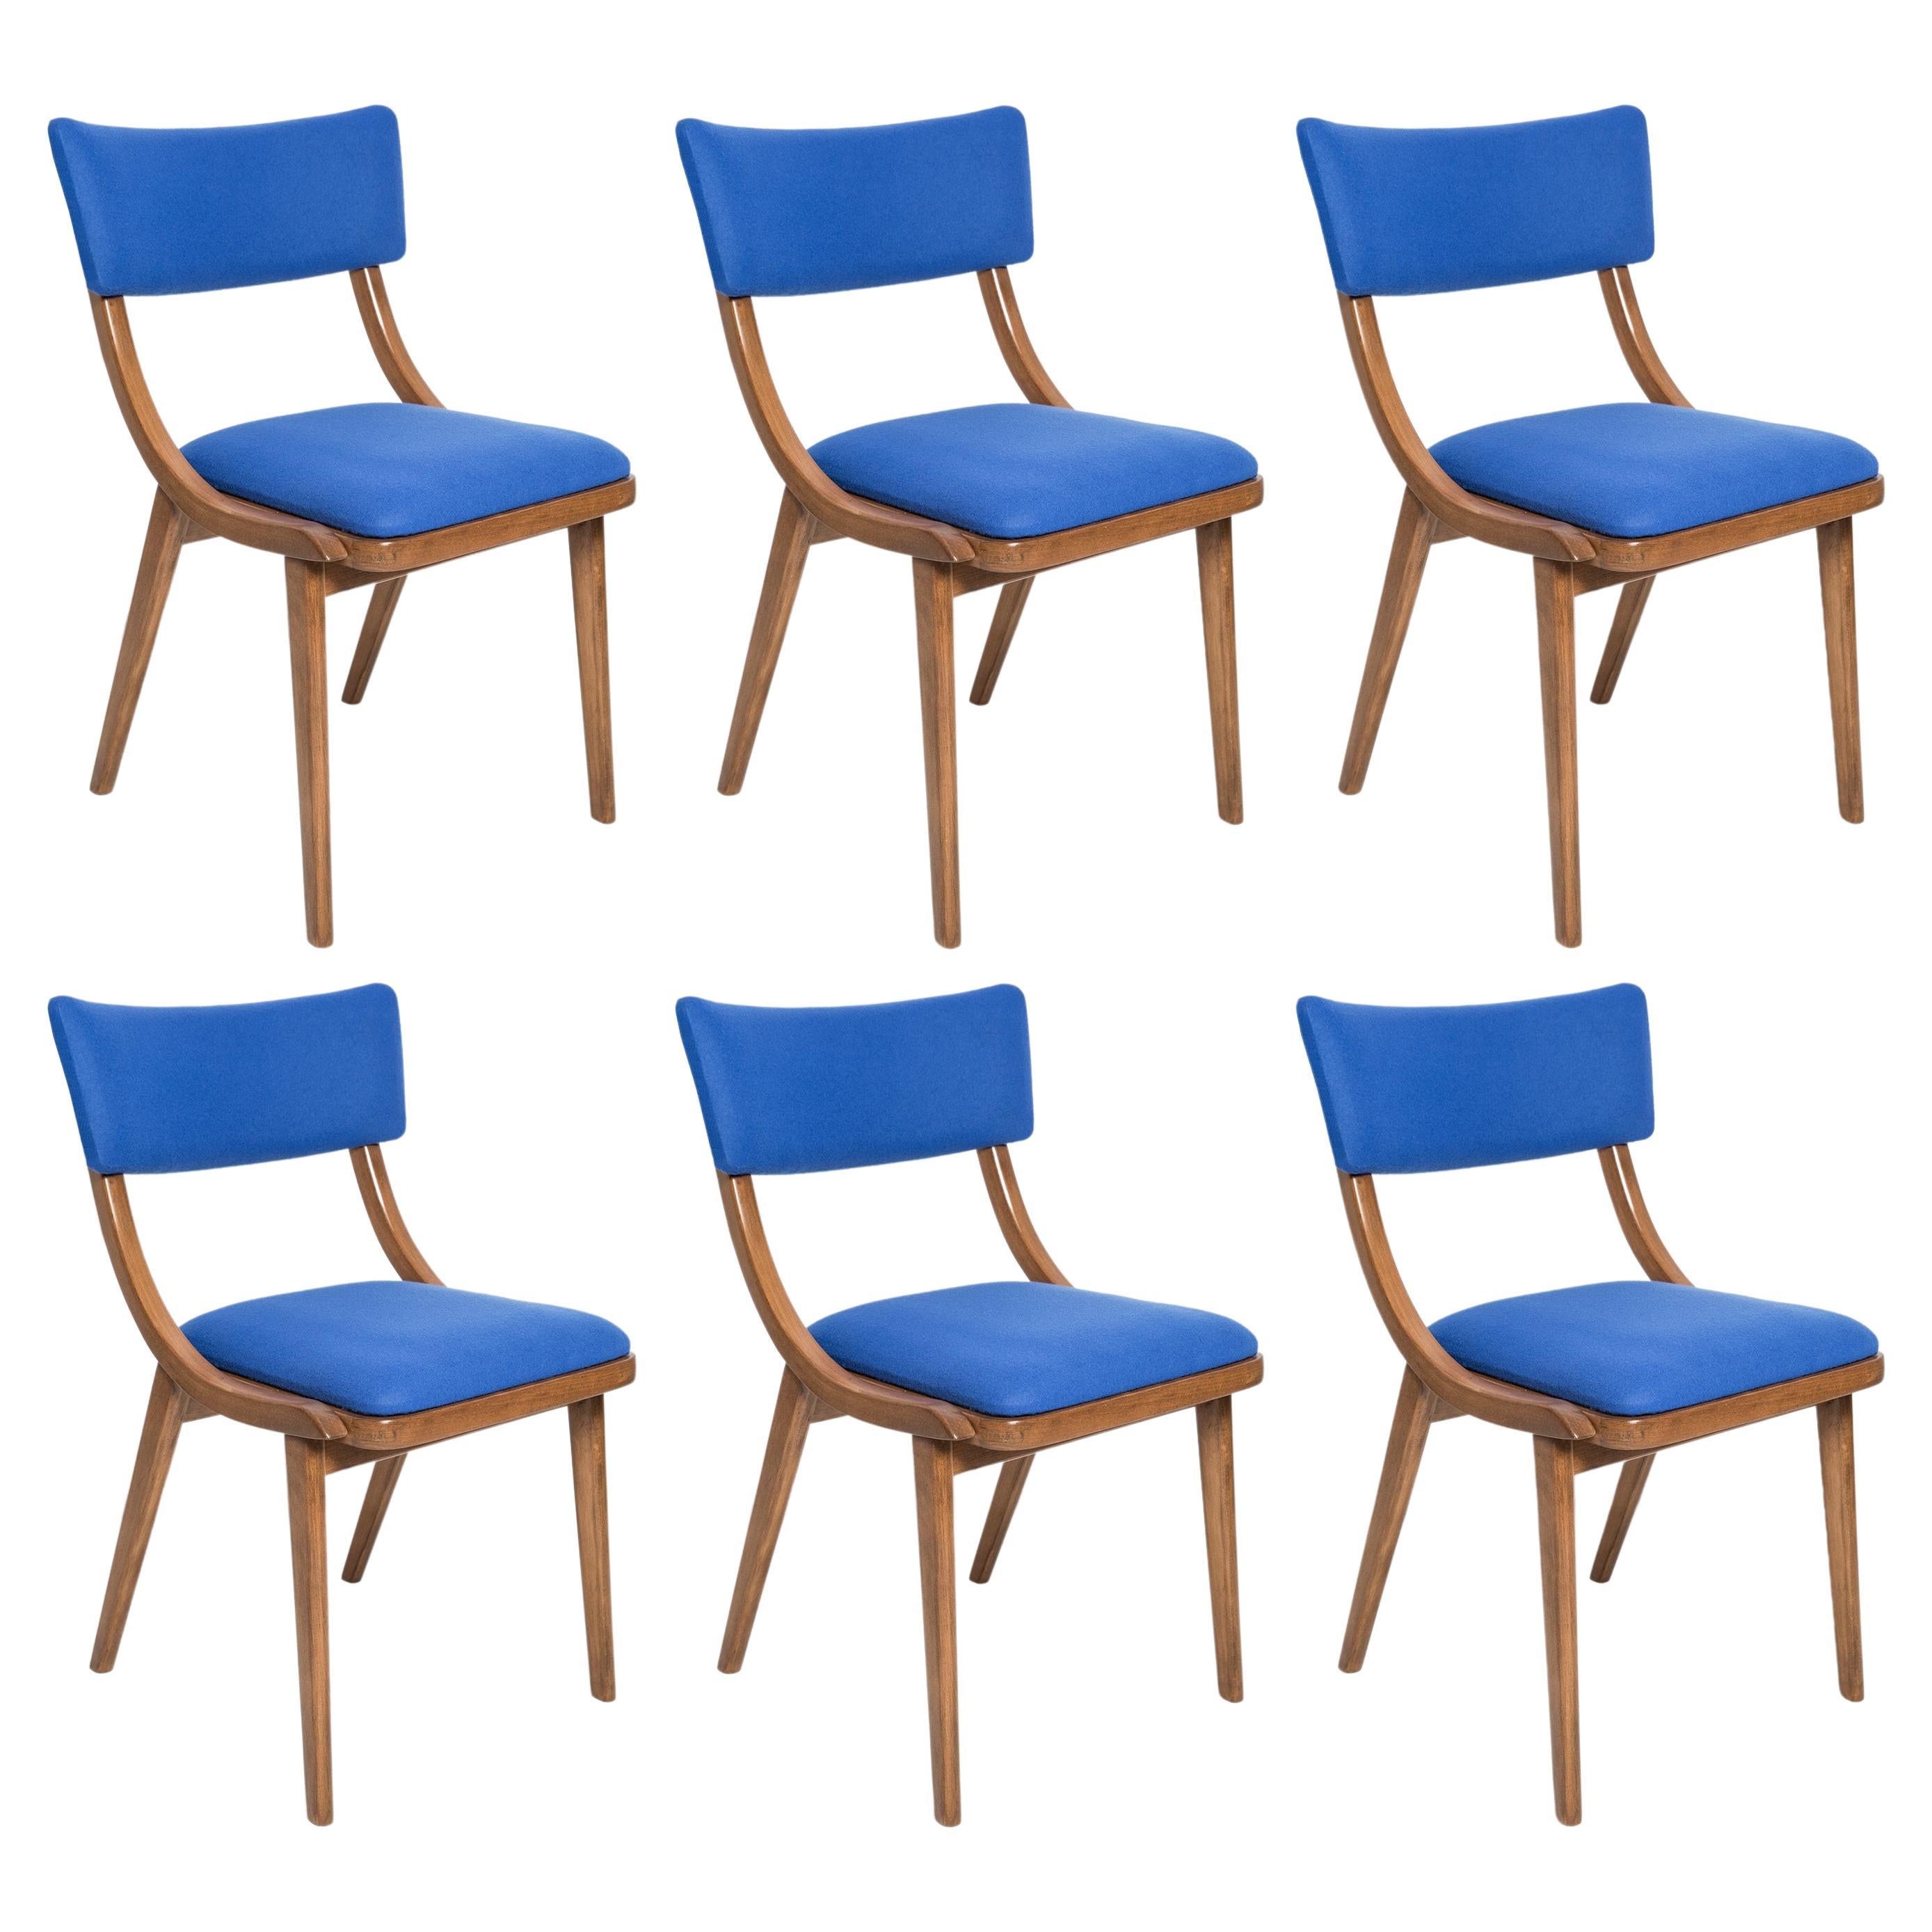 Set of Six Mid Century Modern Bumerang Chairs, Royal Blue Wool, Poland, 1960s For Sale